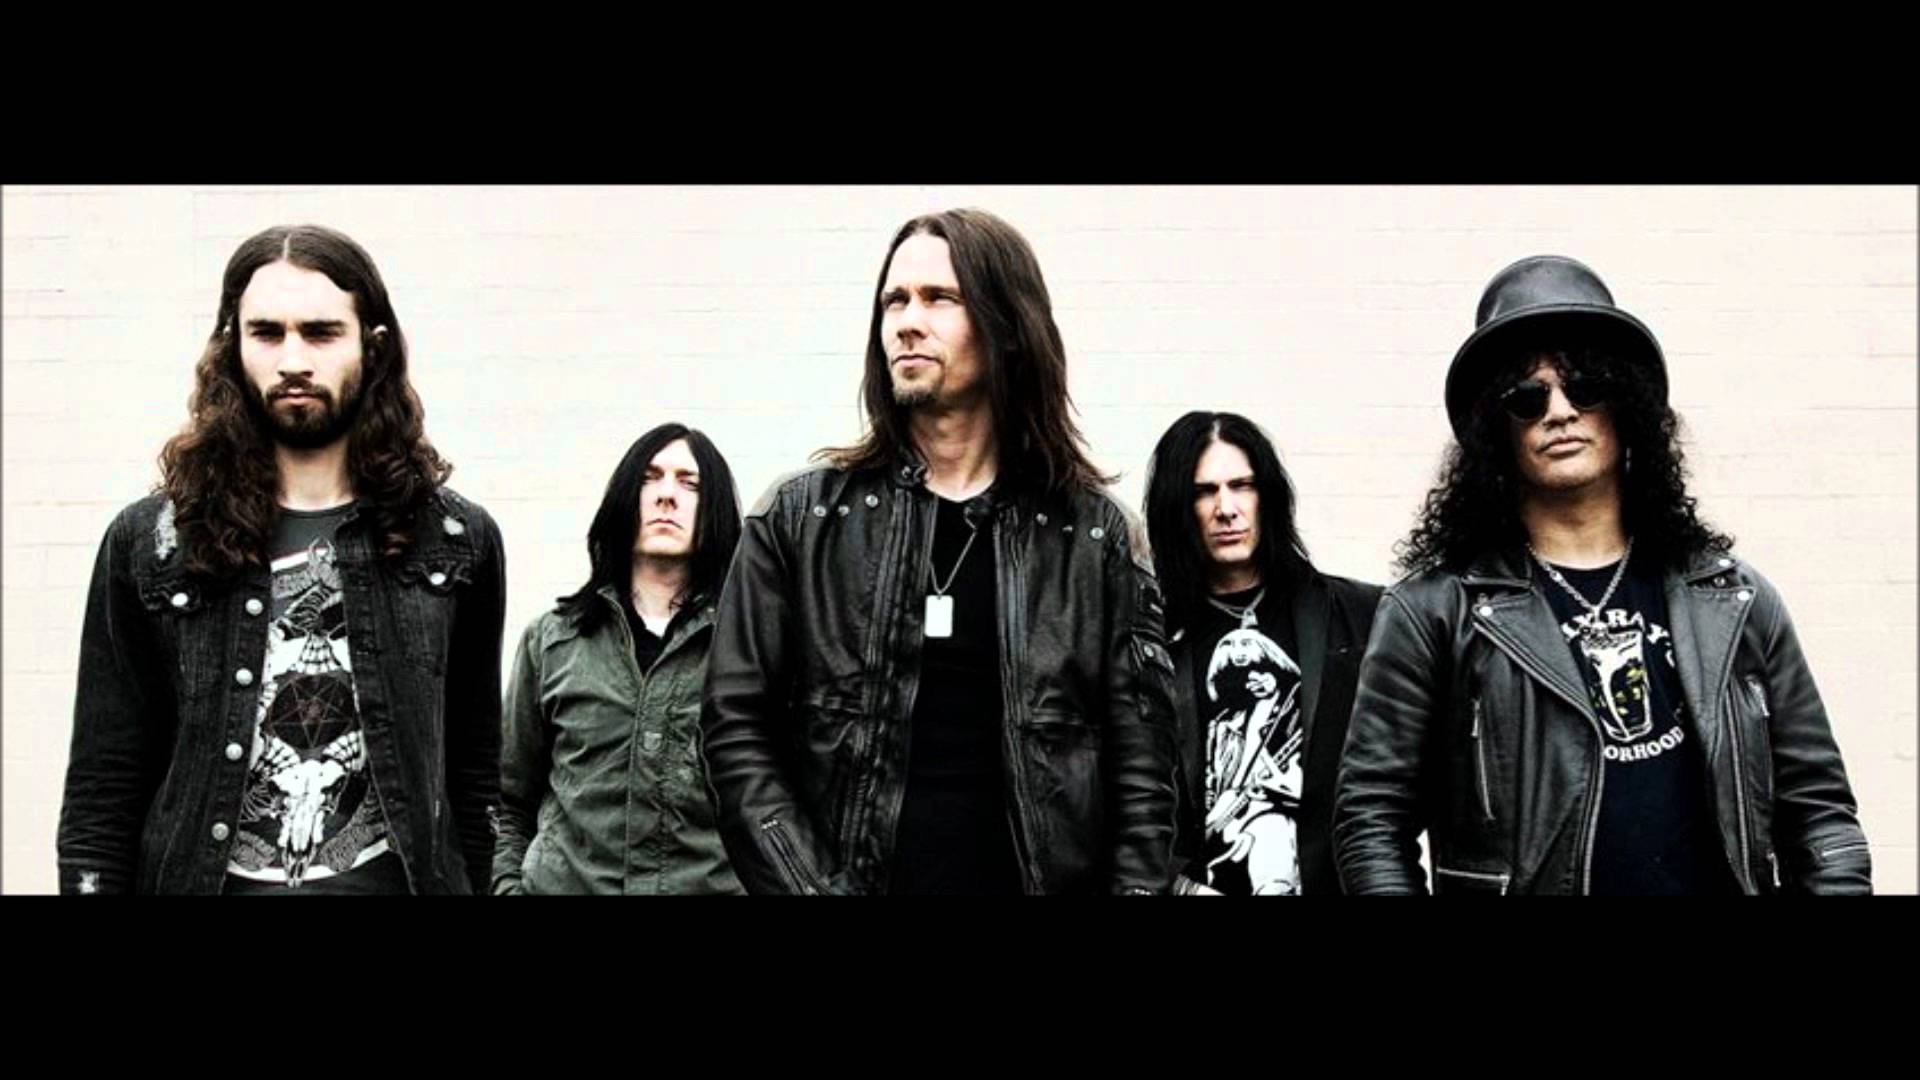 Slash World On Fire feat. Myles Kennedy and The Conspirators